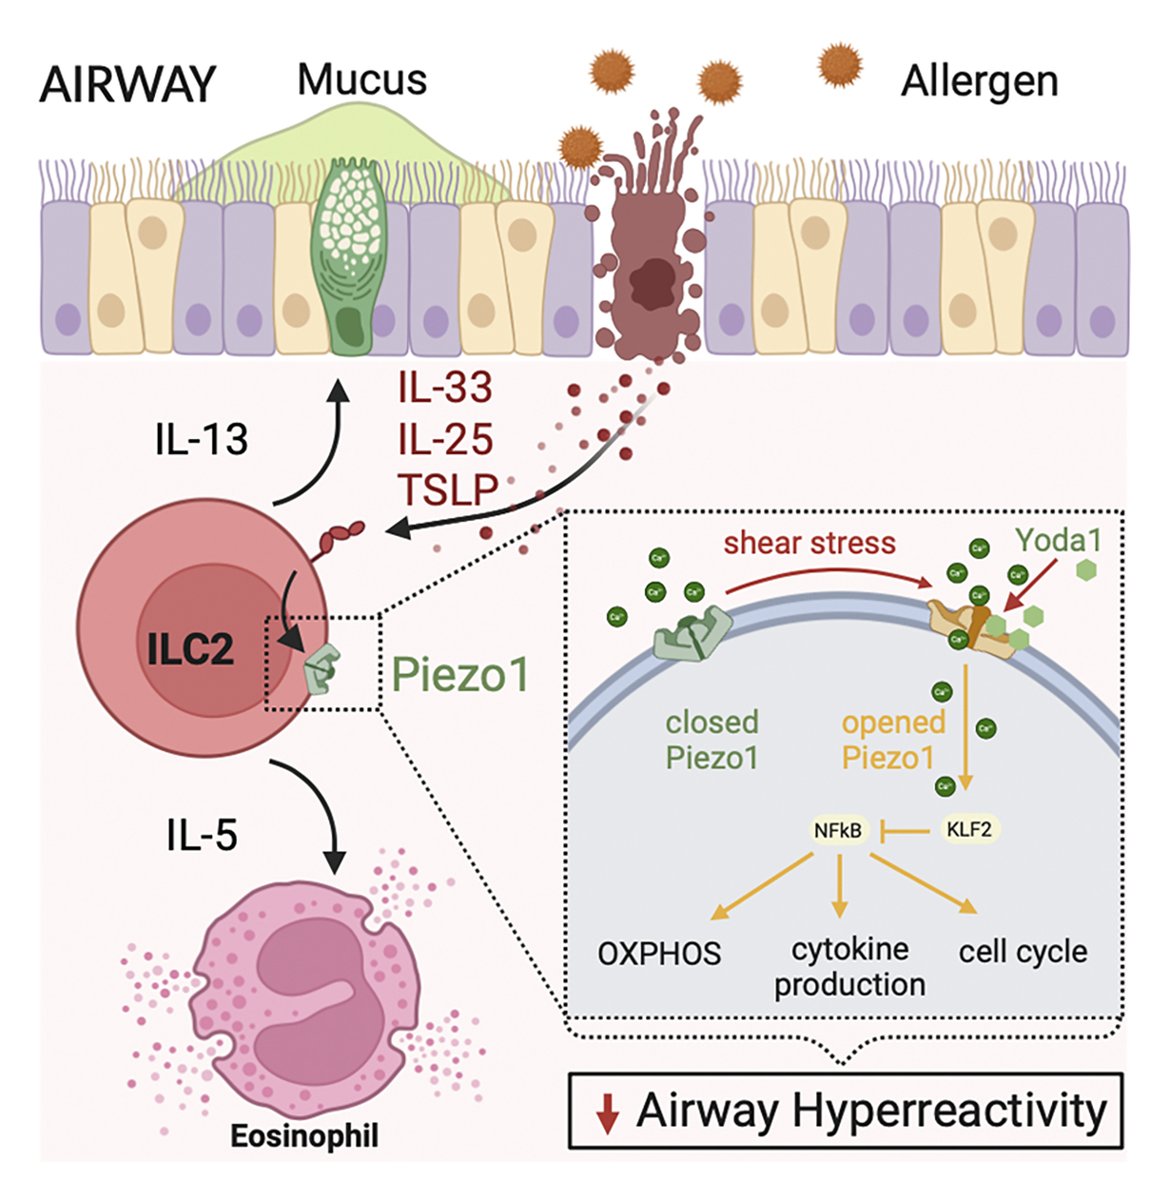 Hurrell, Akbari et al. @KECKSchool_USC define Piezo1 as a critical regulator of ILC2s, and propose the potential of Piezo1 activation as a novel therapeutic approach for the treatment of ILC2-driven allergic #asthma. hubs.la/Q02qMdy90

#MucosalImmunology